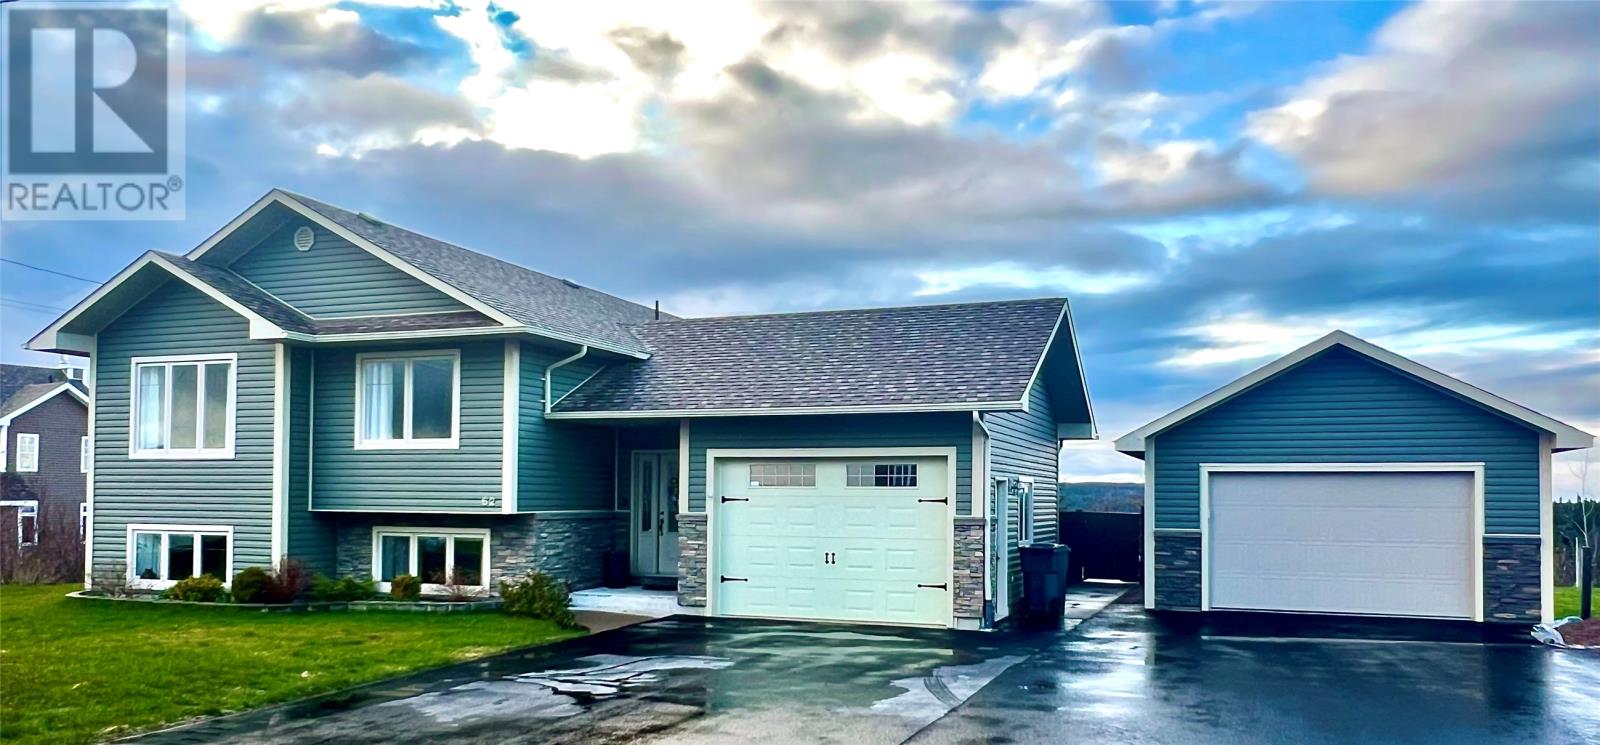 62 SUNSET Drive located in CLARENVILLE, Newfoundland and Labrador